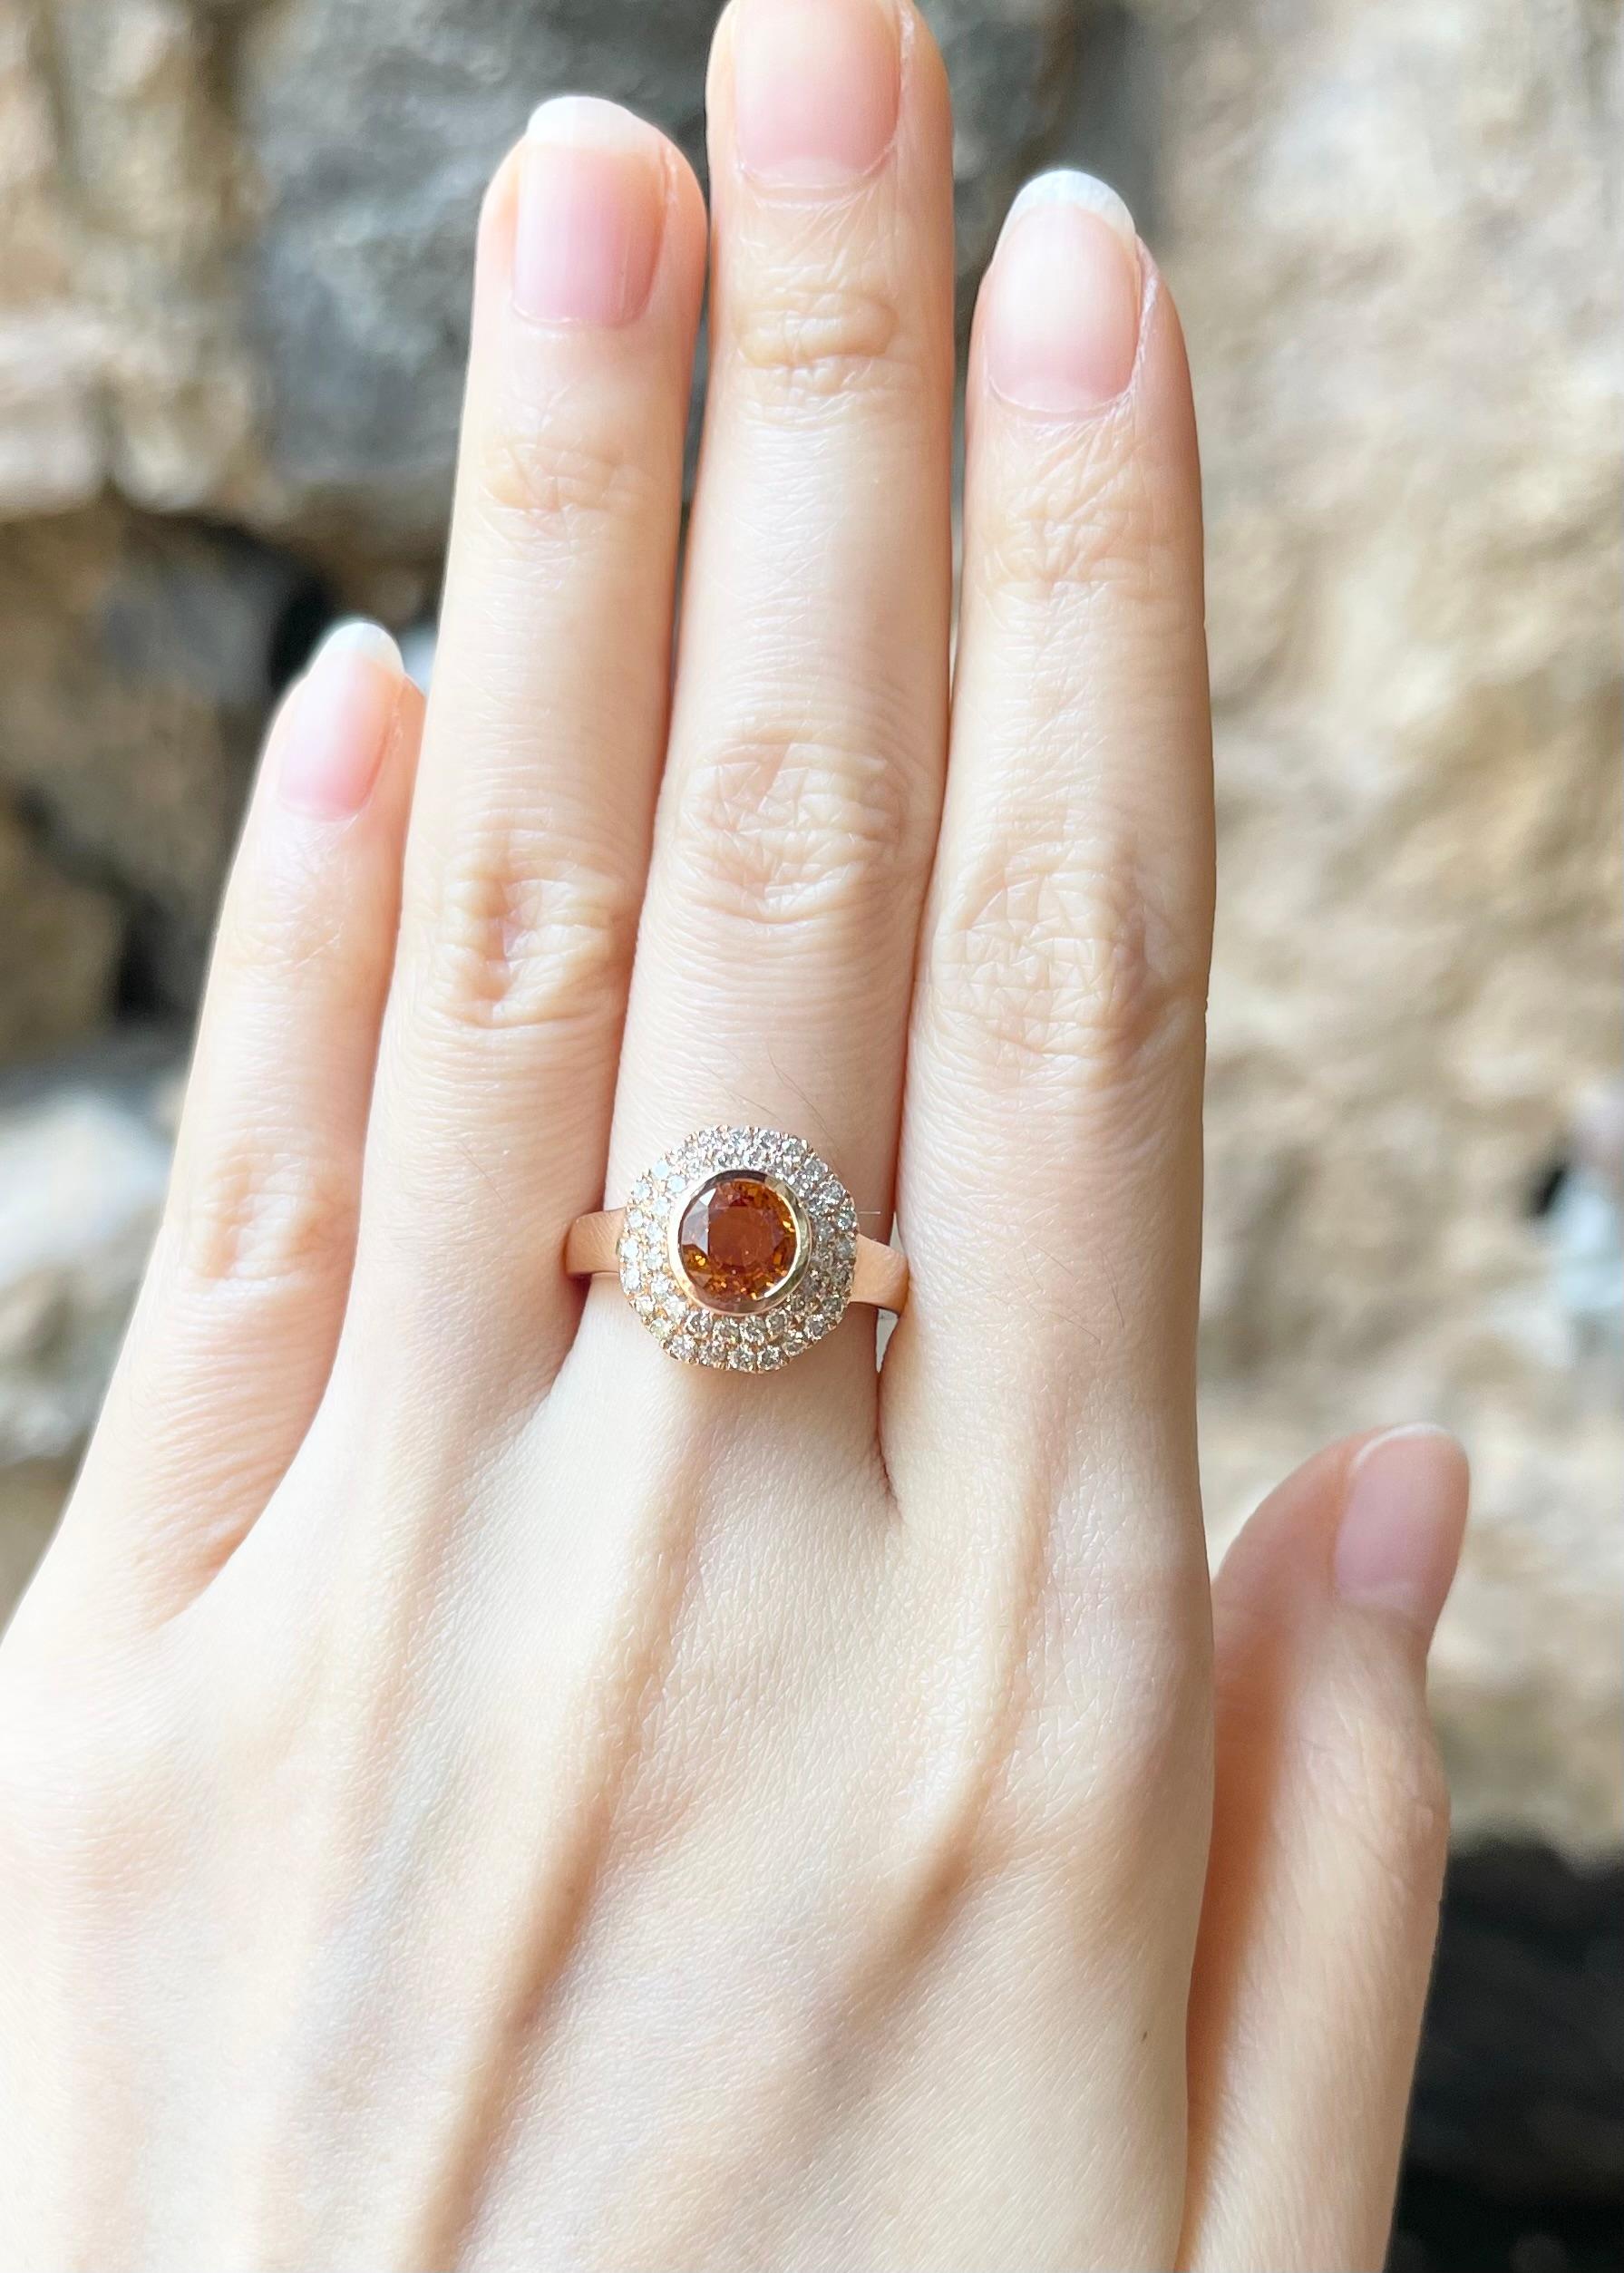 Orange Sapphire 1.76 carats with Brown Diamond 0.56 carat Ring set in 18K Rose Gold Settings

Width:  1.4 cm 
Length: 1.4 cm
Ring Size: 53
Total Weight: 7.79 grams

